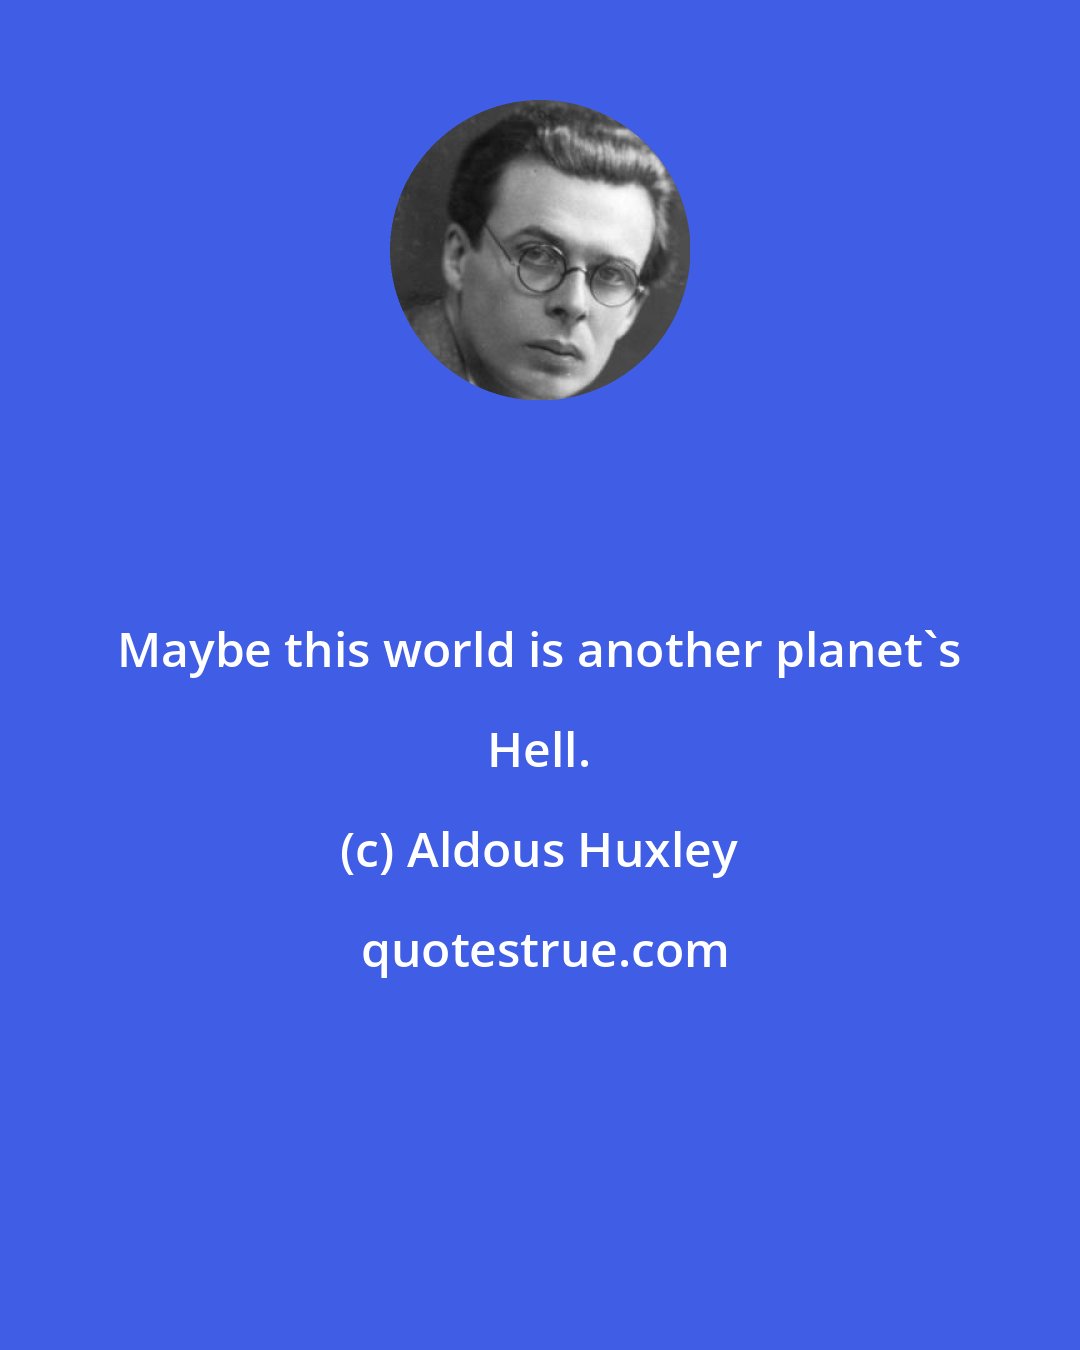 Aldous Huxley: Maybe this world is another planet's Hell.